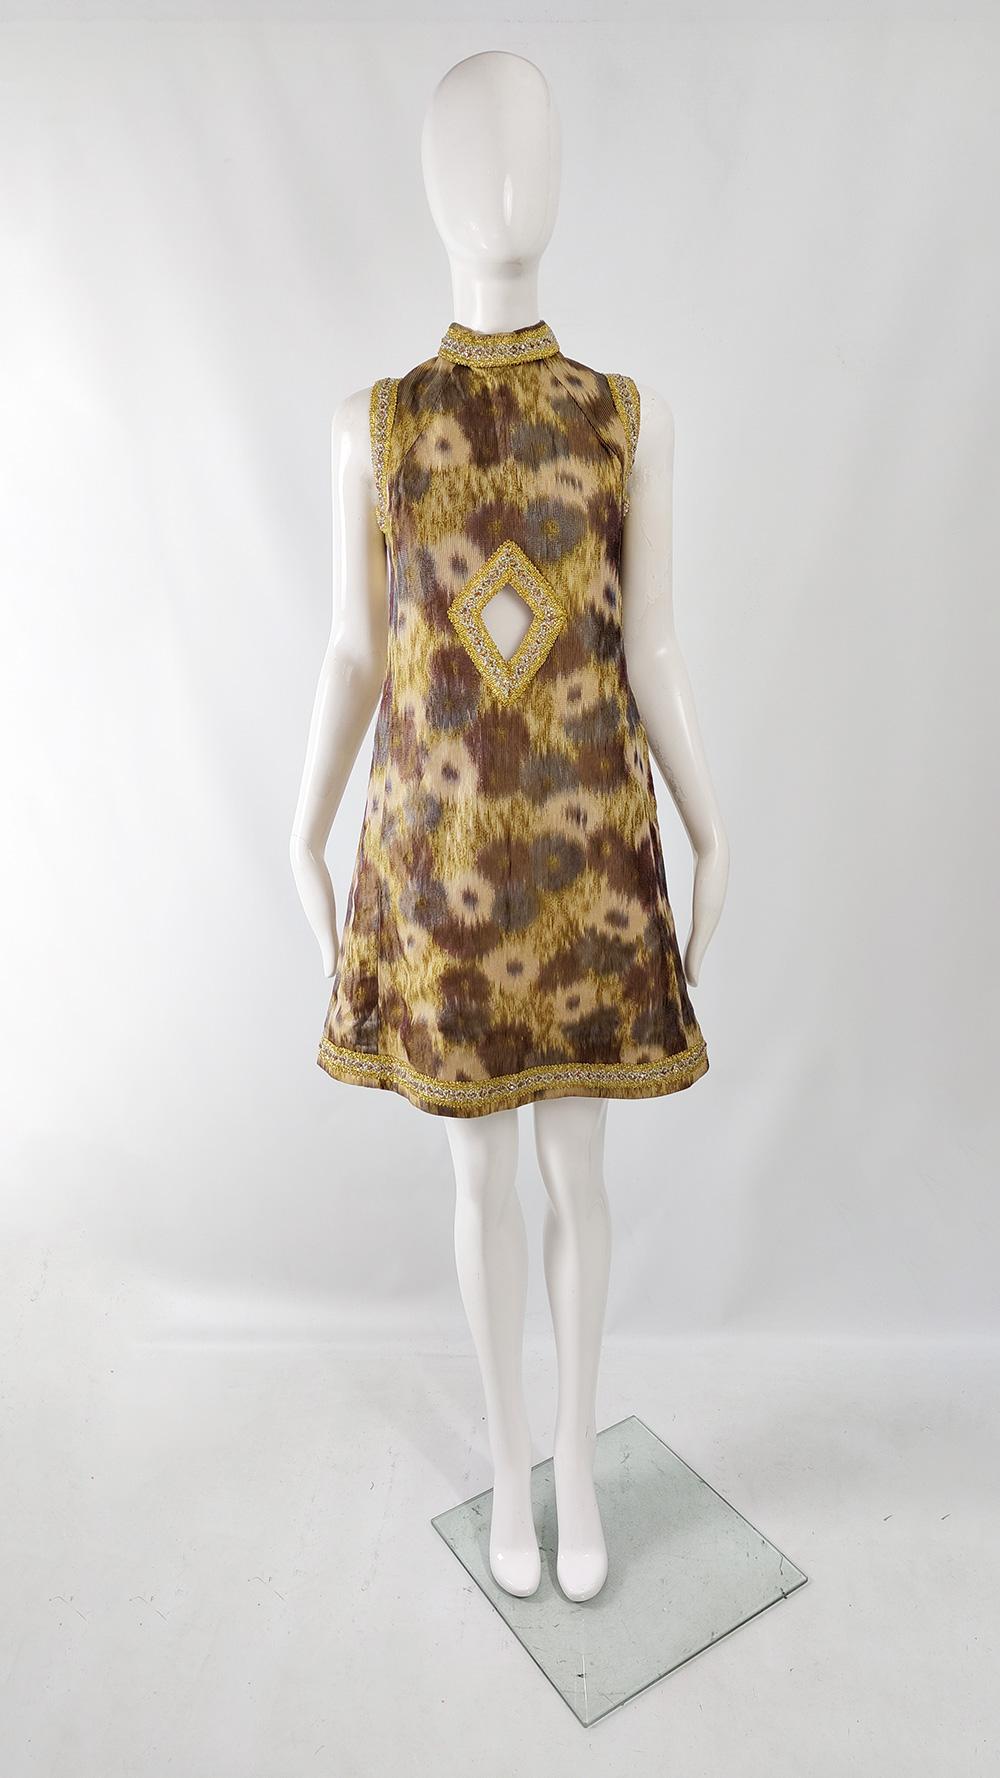 A stunning and rare vintage women's dress from the 60s. In a synthetic woven fabric that gives great structure, and has an Ikat style pattern woven throughout. The sleeveless armholes and mock neck are trimmed with a gold and silver lurex which is